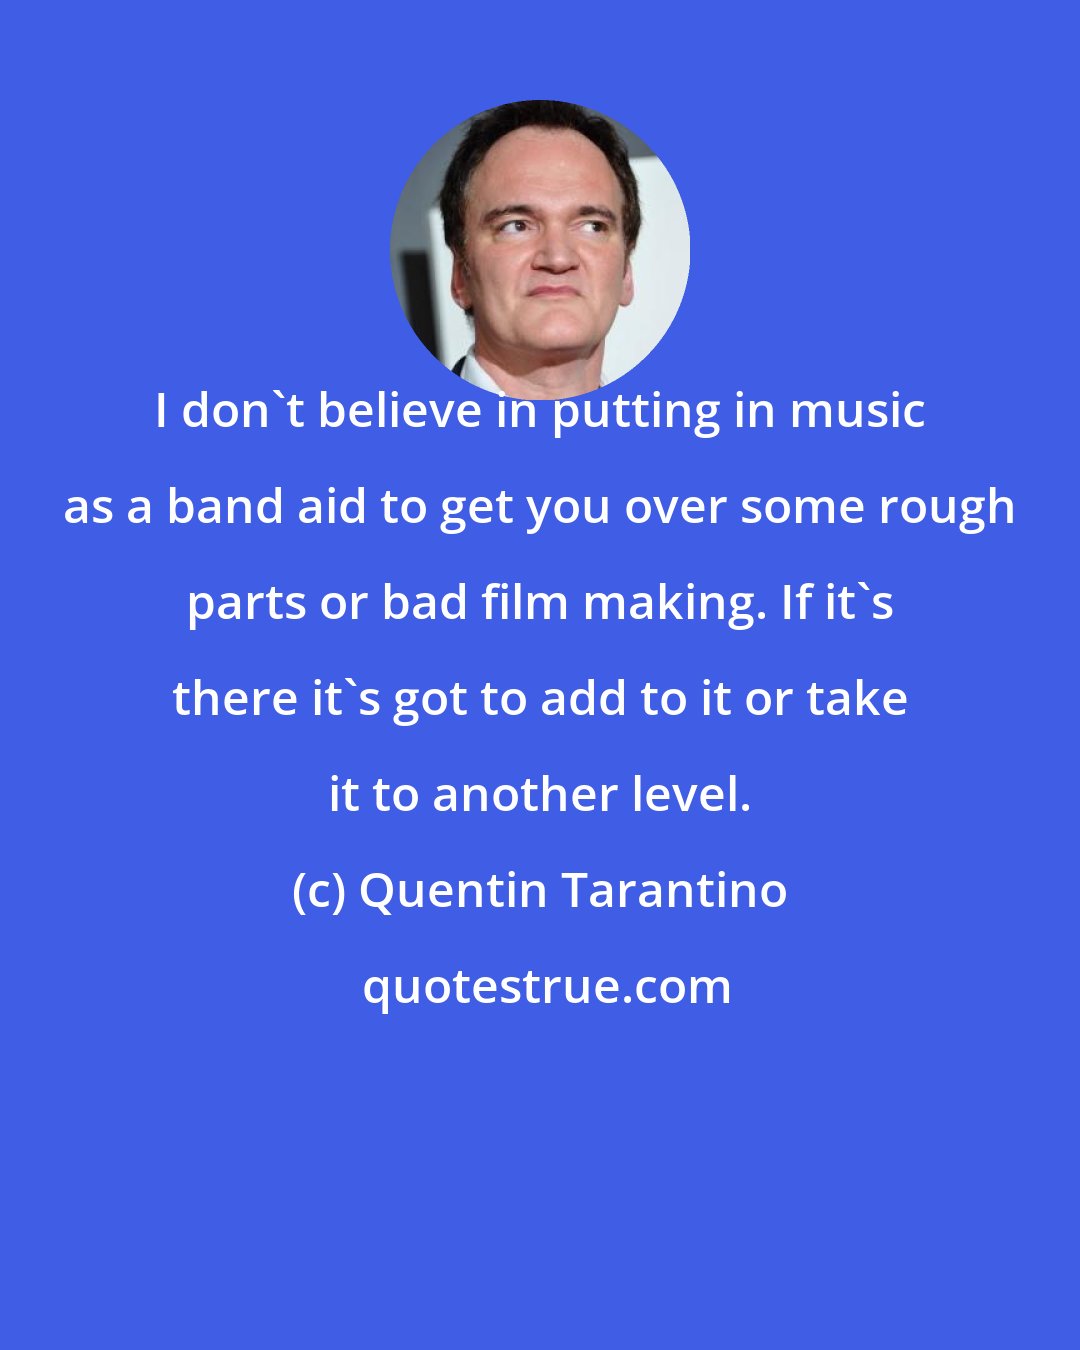 Quentin Tarantino: I don't believe in putting in music as a band aid to get you over some rough parts or bad film making. If it's there it's got to add to it or take it to another level.